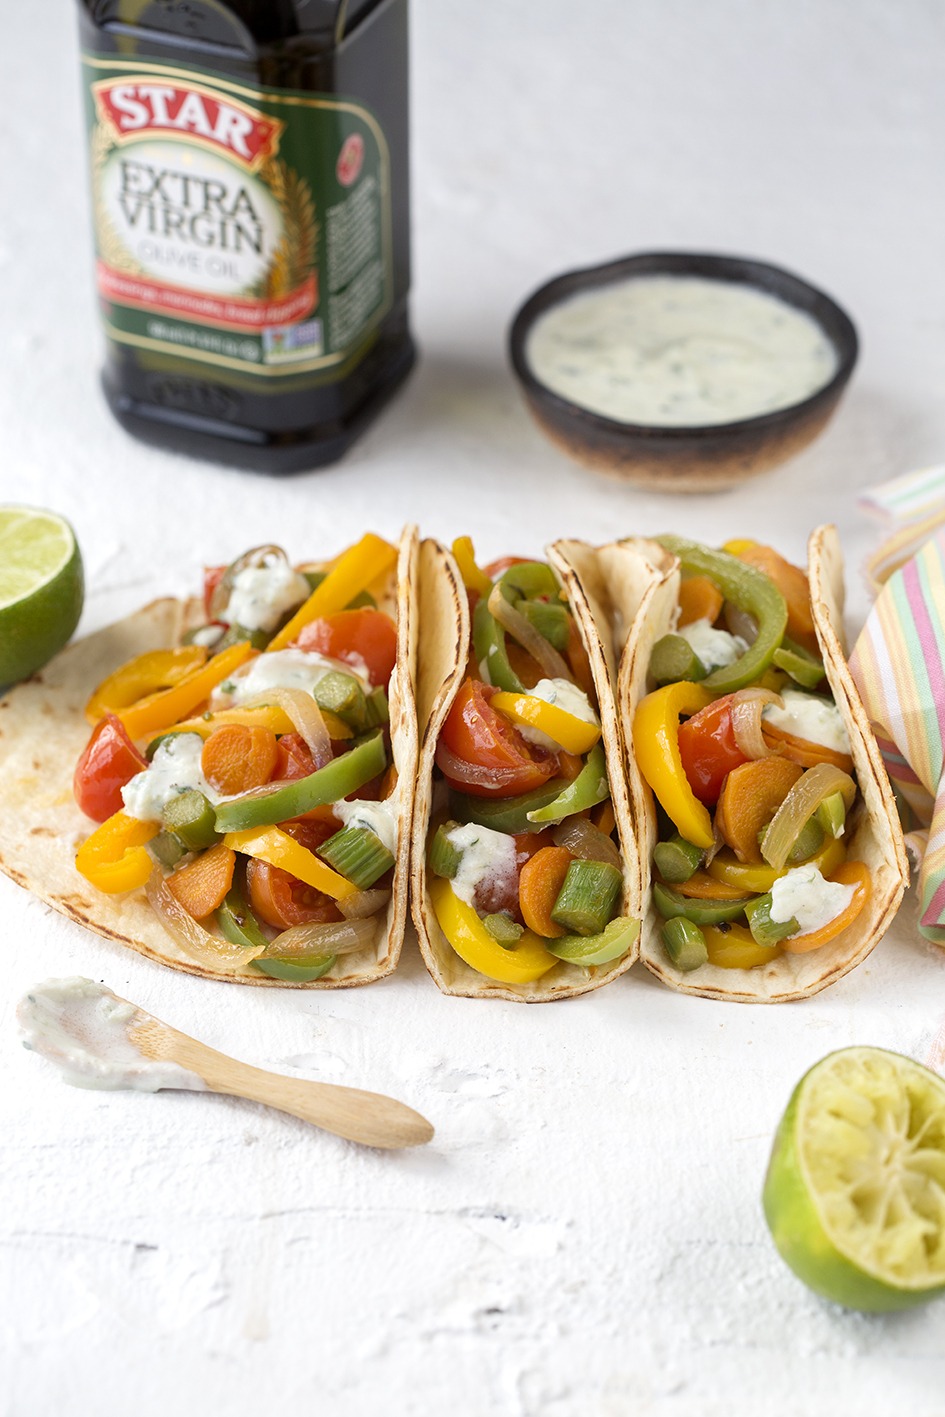 Tex-Mex meets Mediterranean cuisine in a mouthwatering fusion of flavors! #STARFineFoods